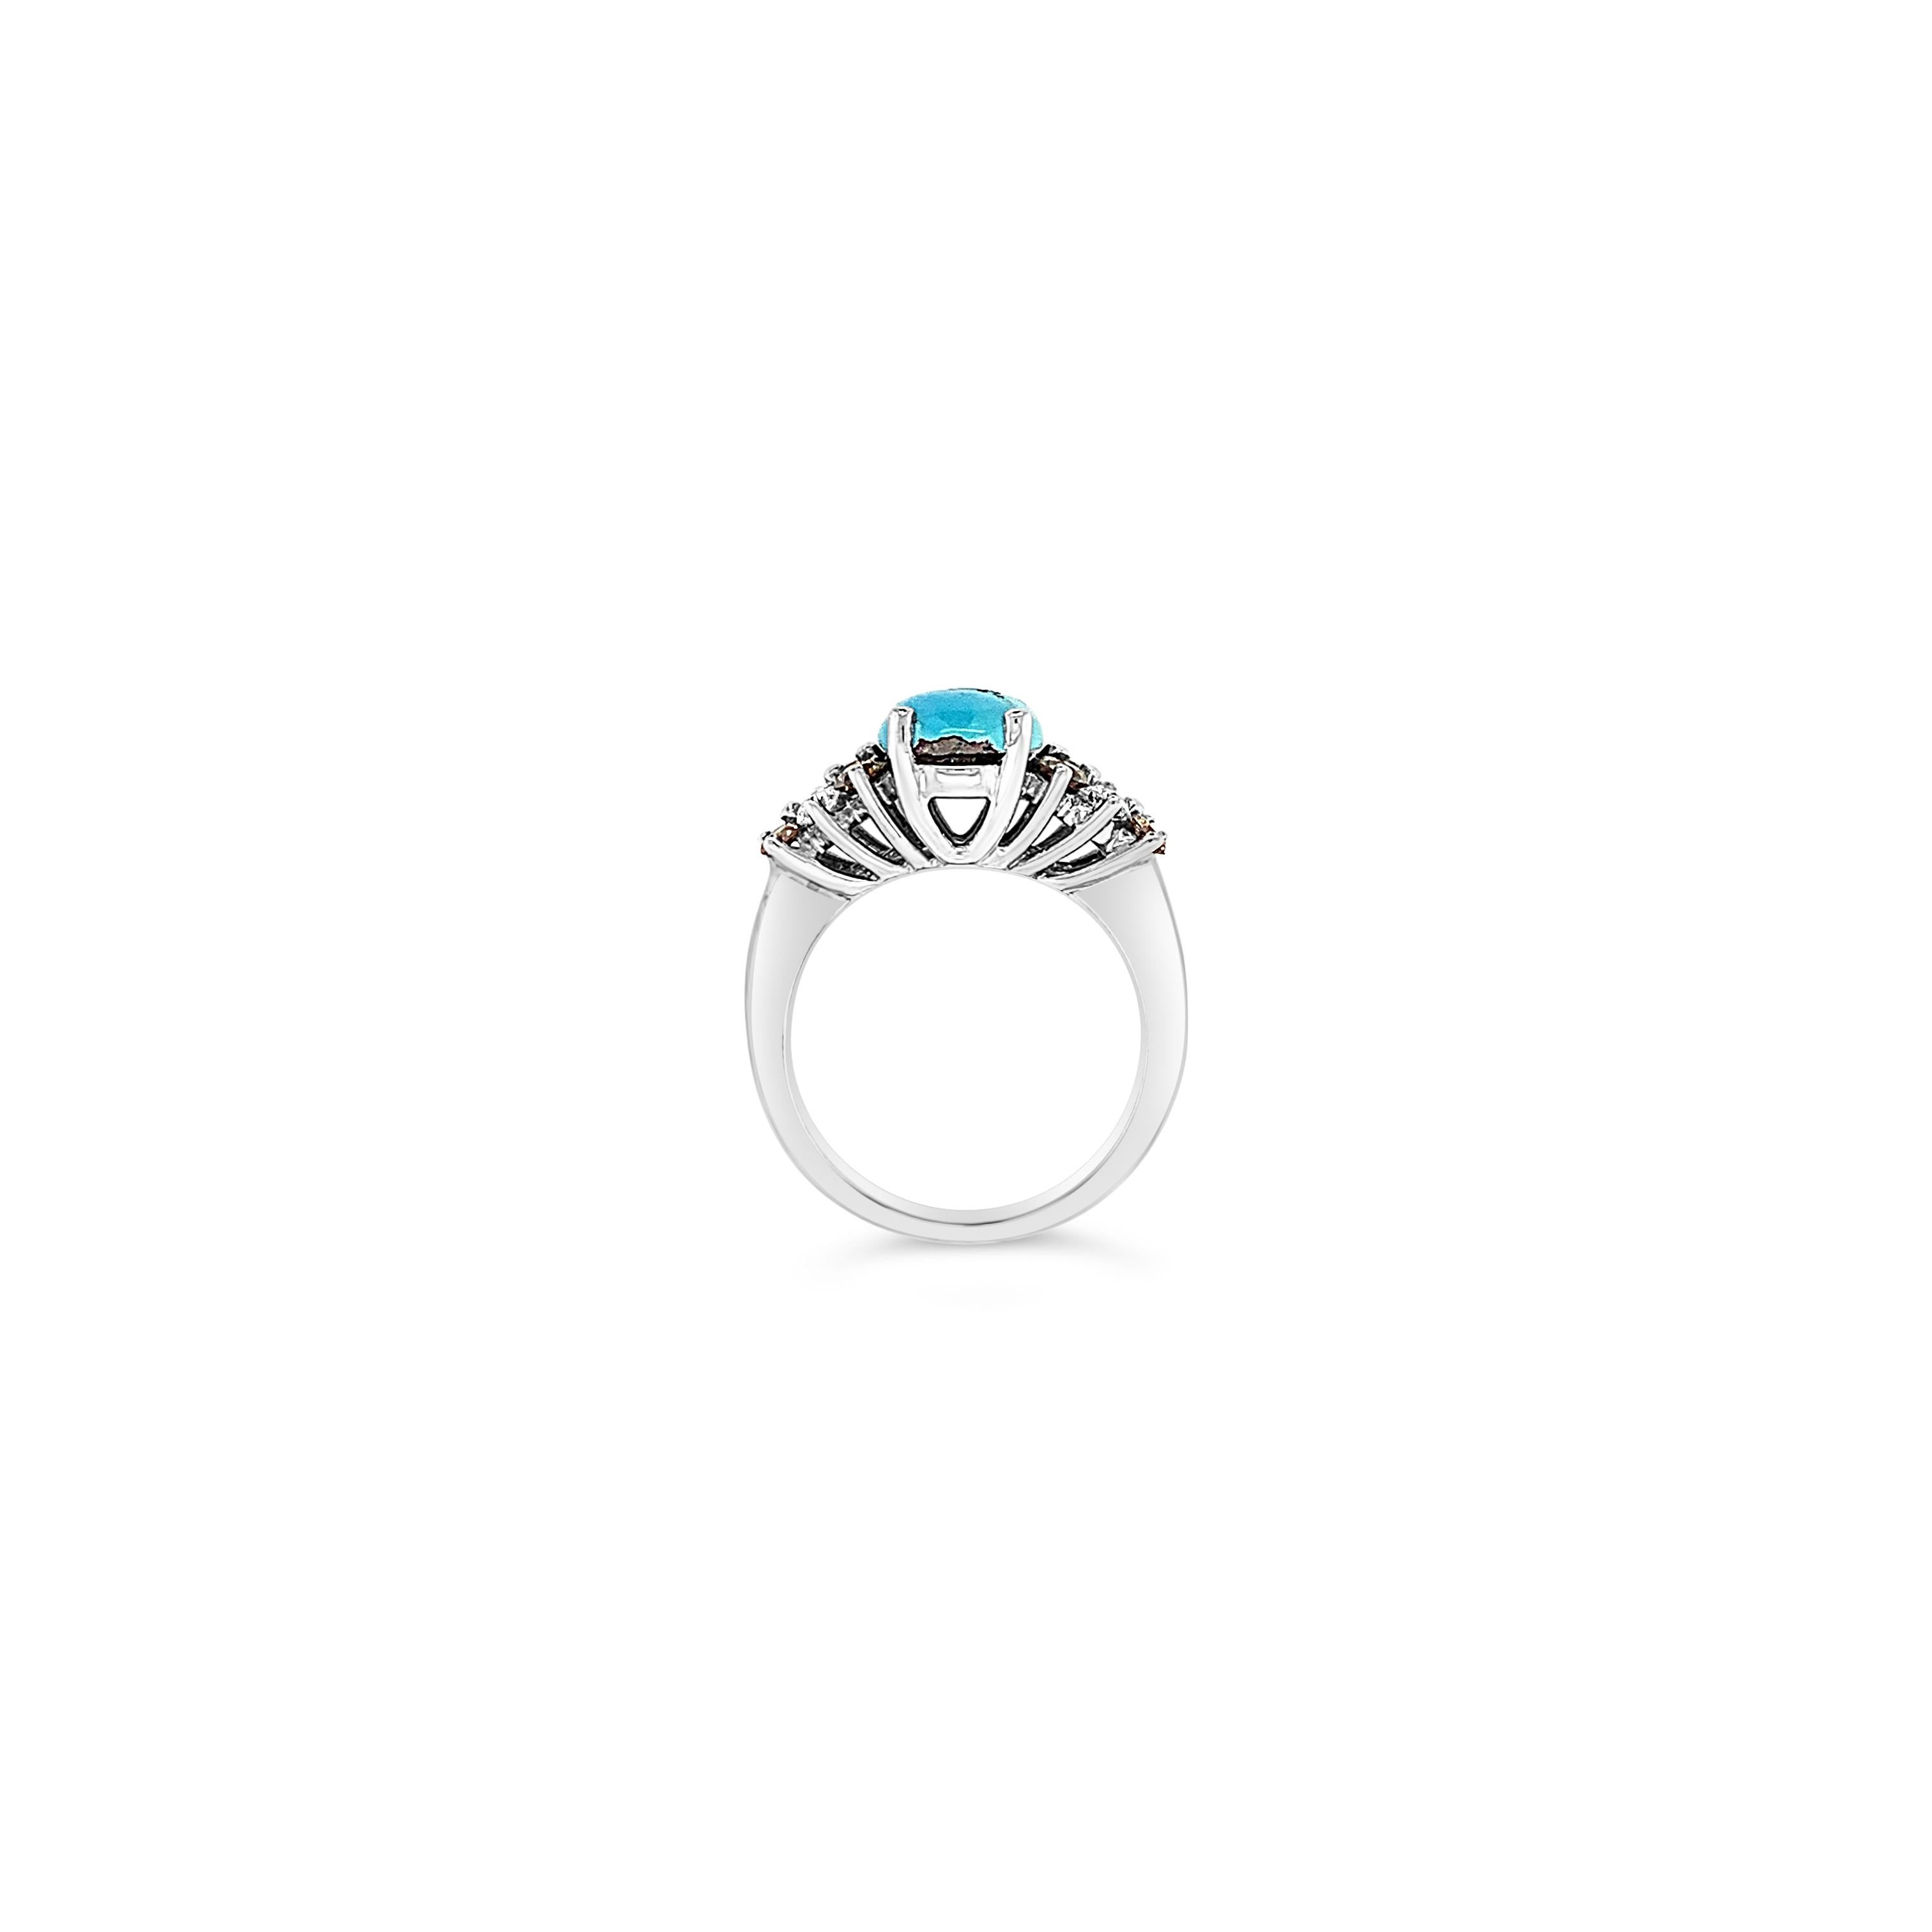 Le Vian® Ring featuring 2 cts. Robins Egg Blue Turquoise™, 5/8 cts. Chocolate Diamonds®, 1/3 cts. Vanilla Diamonds® set in 14K Vanilla Gold®. Please feel free to reach out with any questions! Item comes with a Le Vian® jewelry box as well as a Le